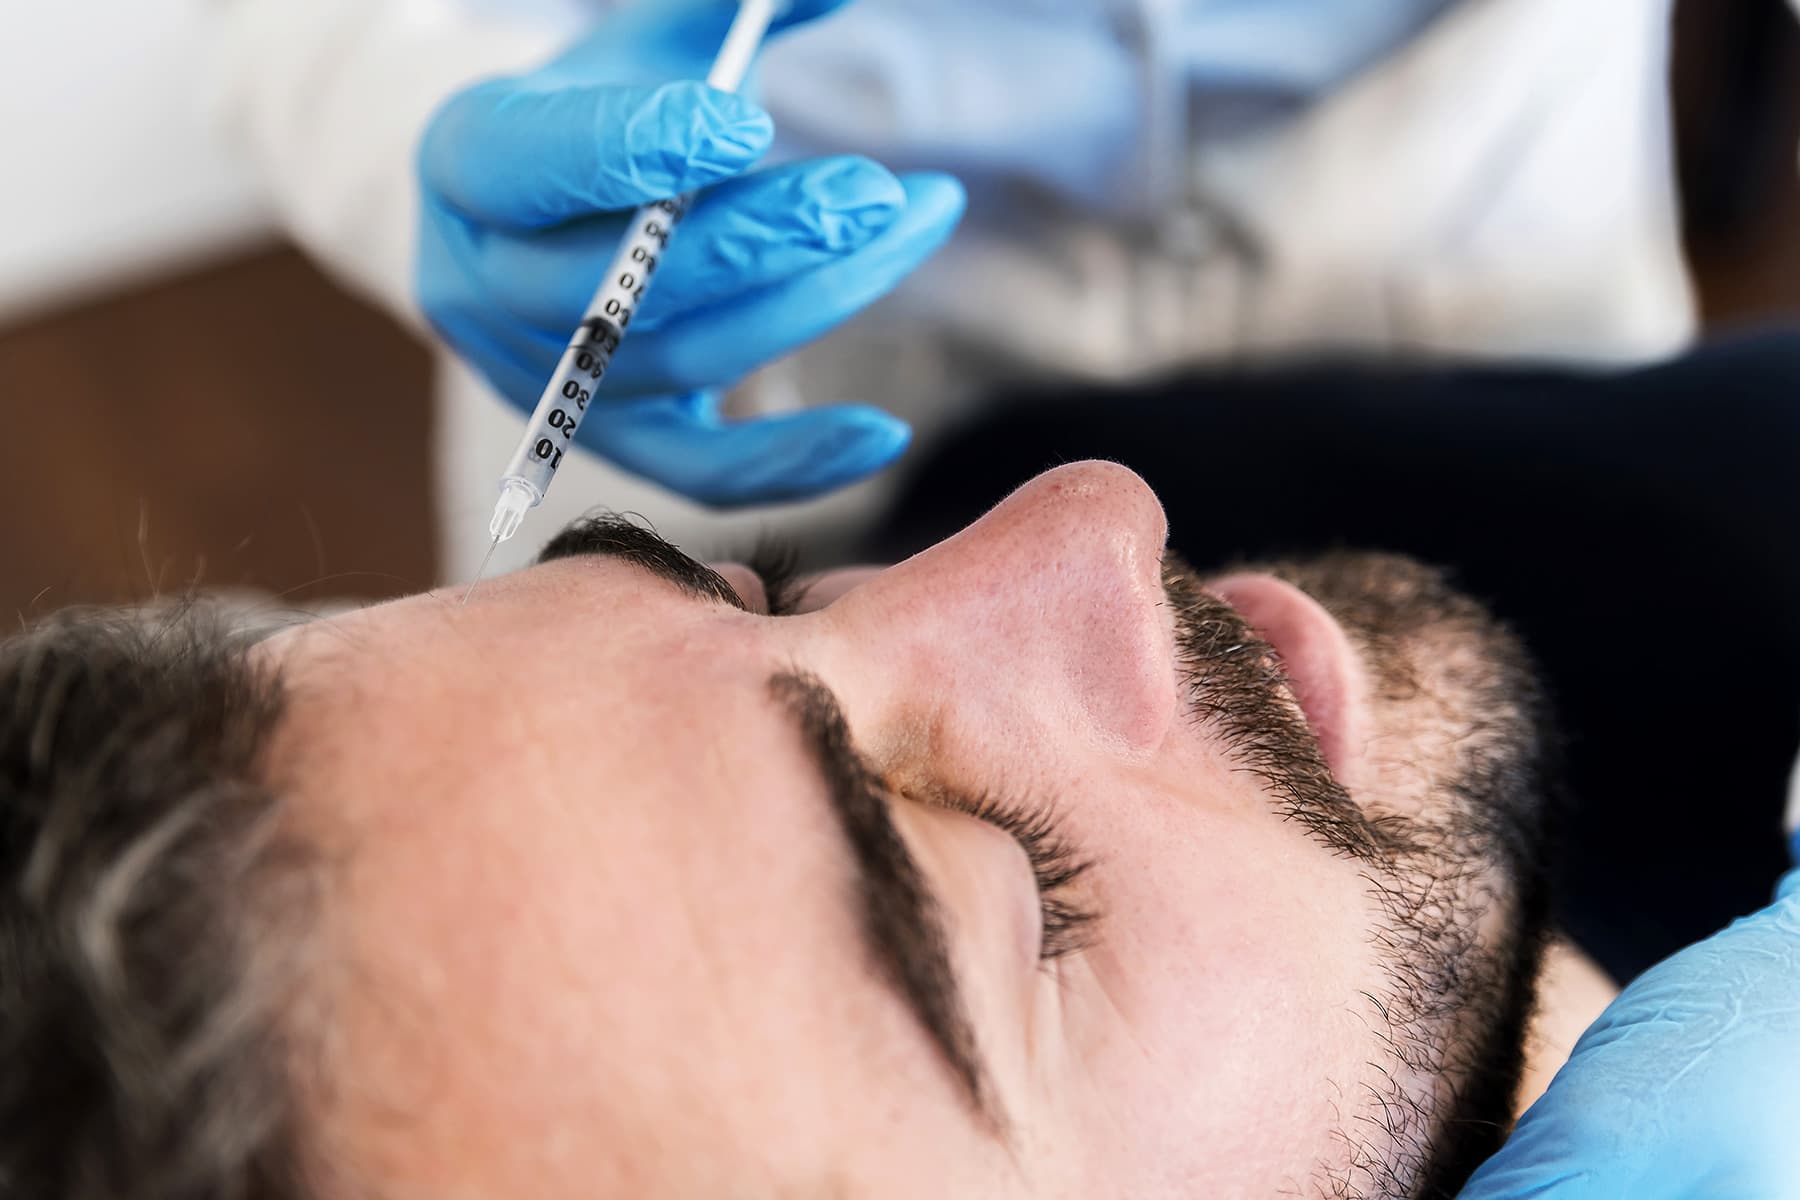 FDA Approves Botox Competitor That Lasts Longer